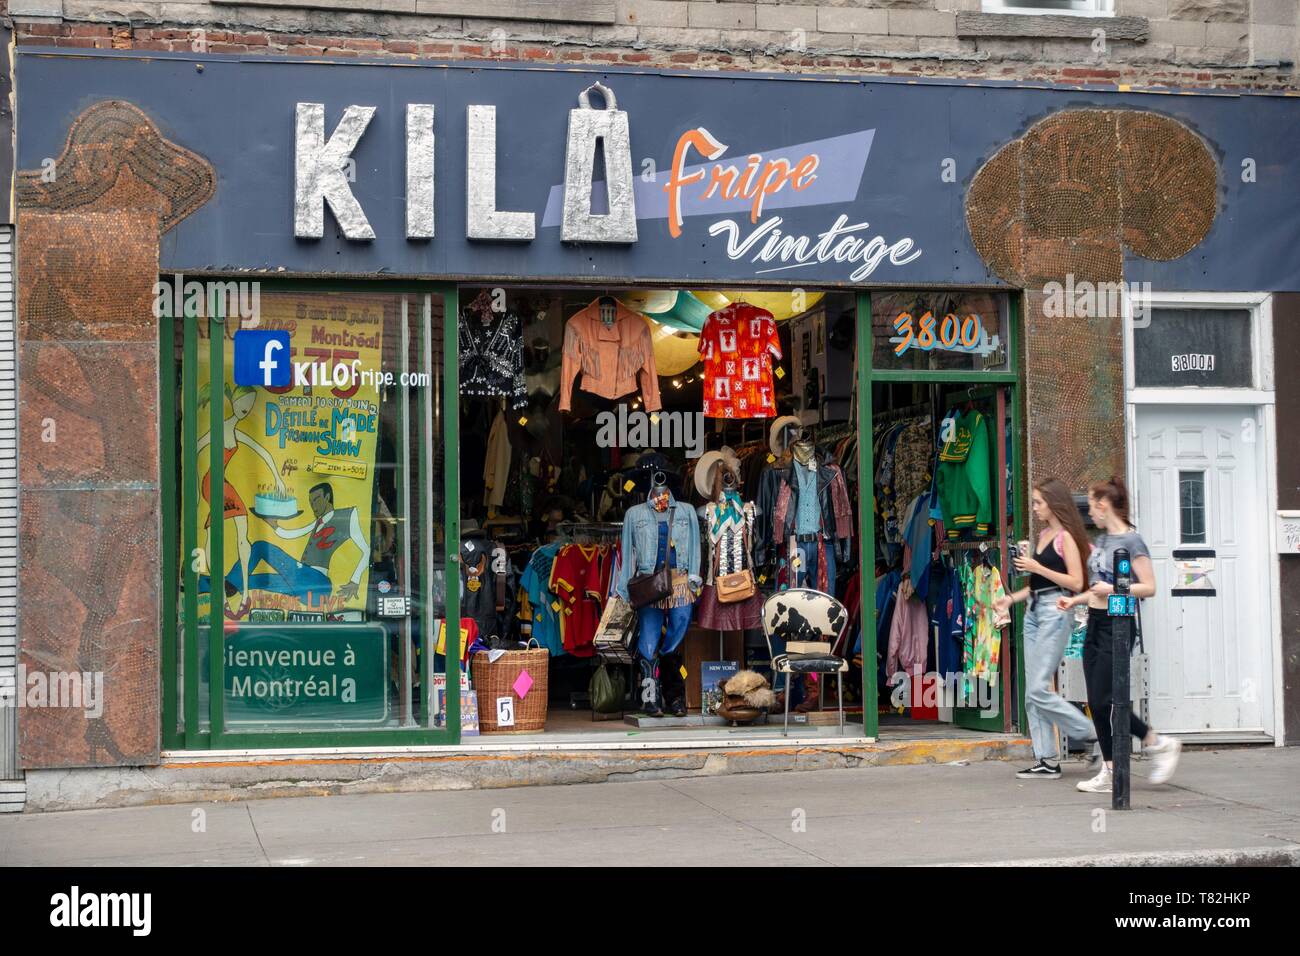 Canada, Province of Quebec, Montreal, Plateau-Mont-Royal, Saint-Laurent Boulevard, Kilo Fripes frippery Store Stock Photo